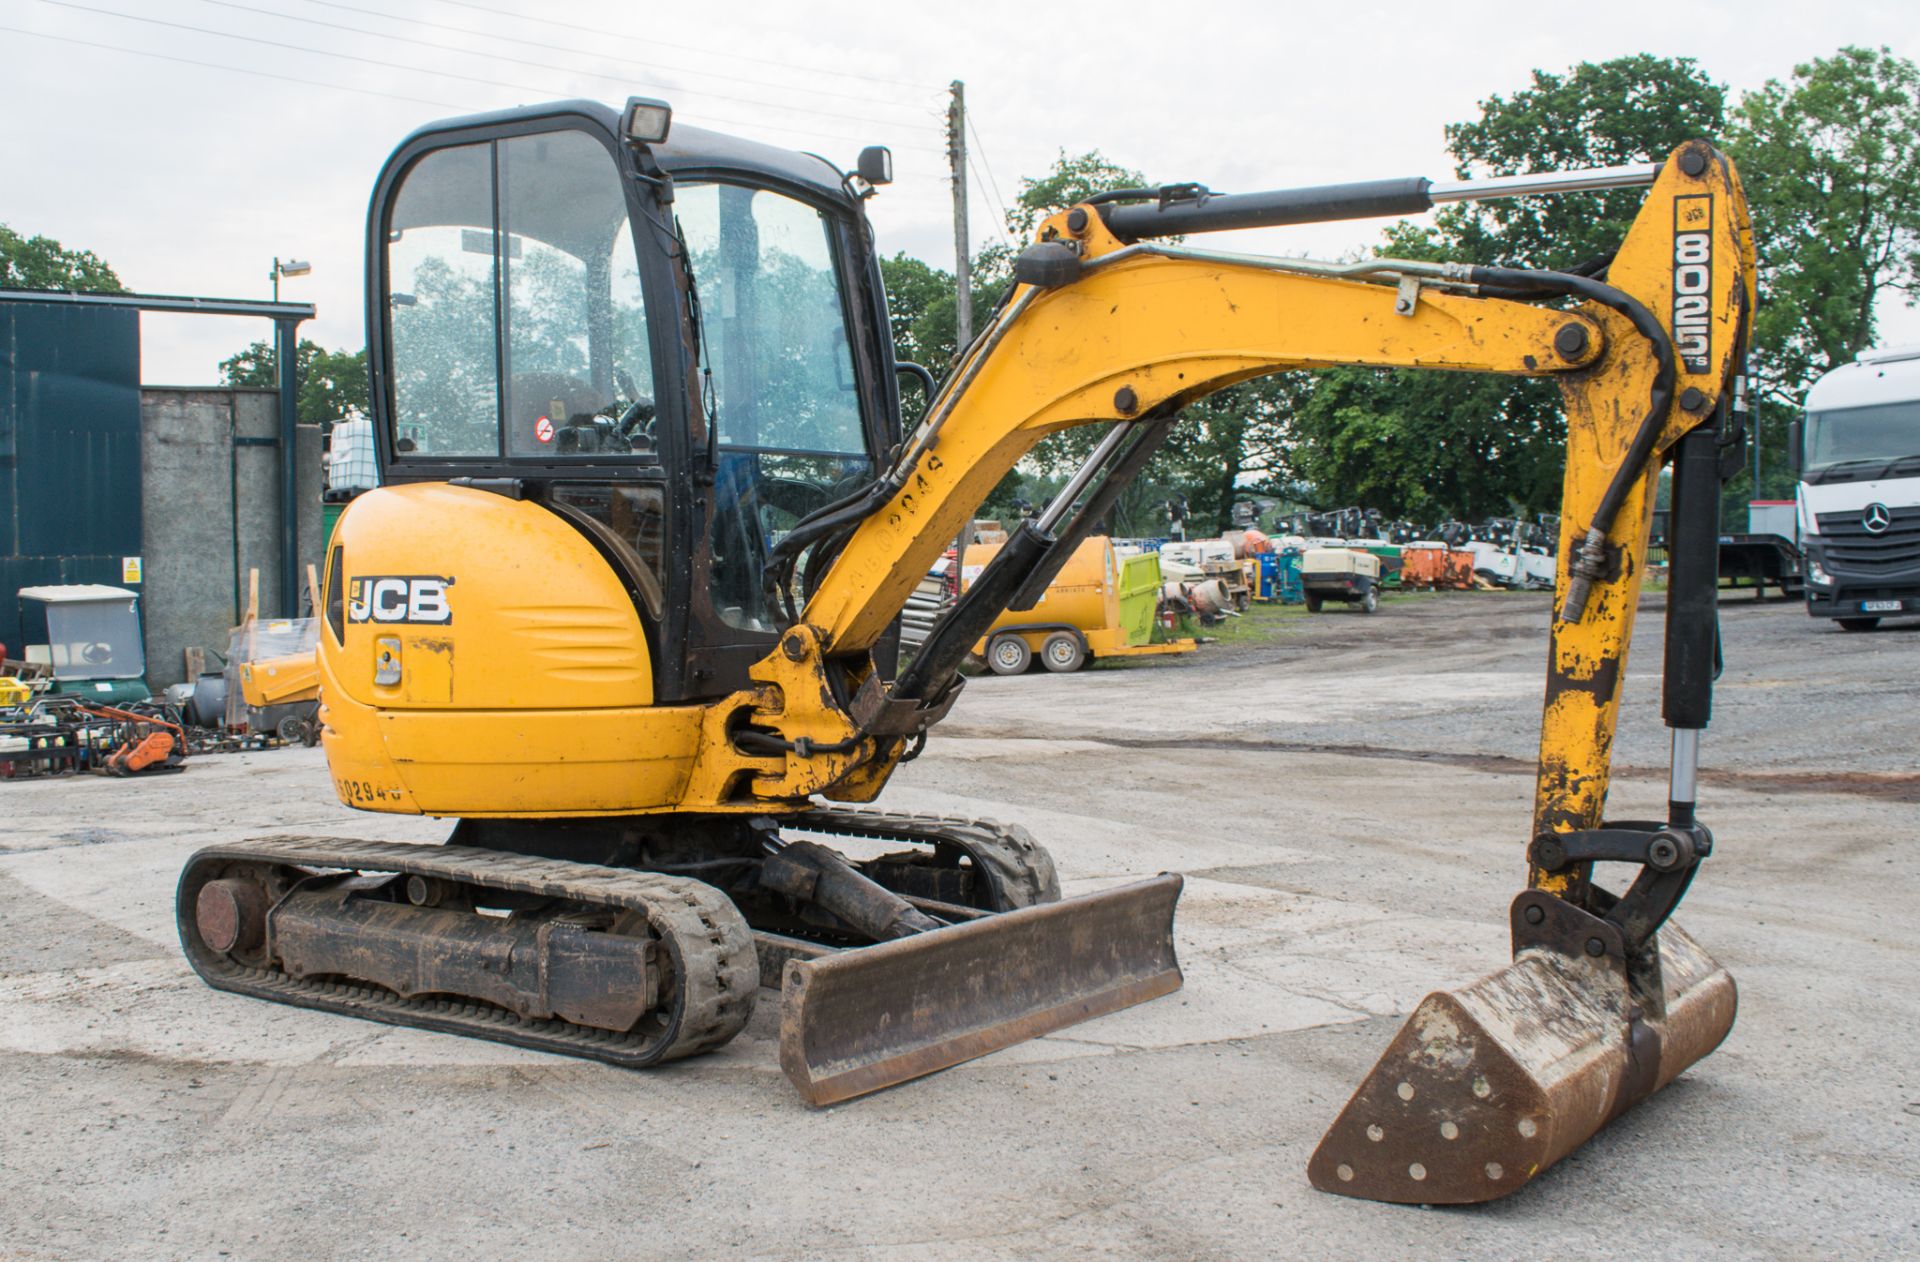 JCB 8025 CTS 2.5 tonne rubber tracked mini excavator Year: 2013 S/N: 2226144 Recorded Hours: 2961 - Image 2 of 12